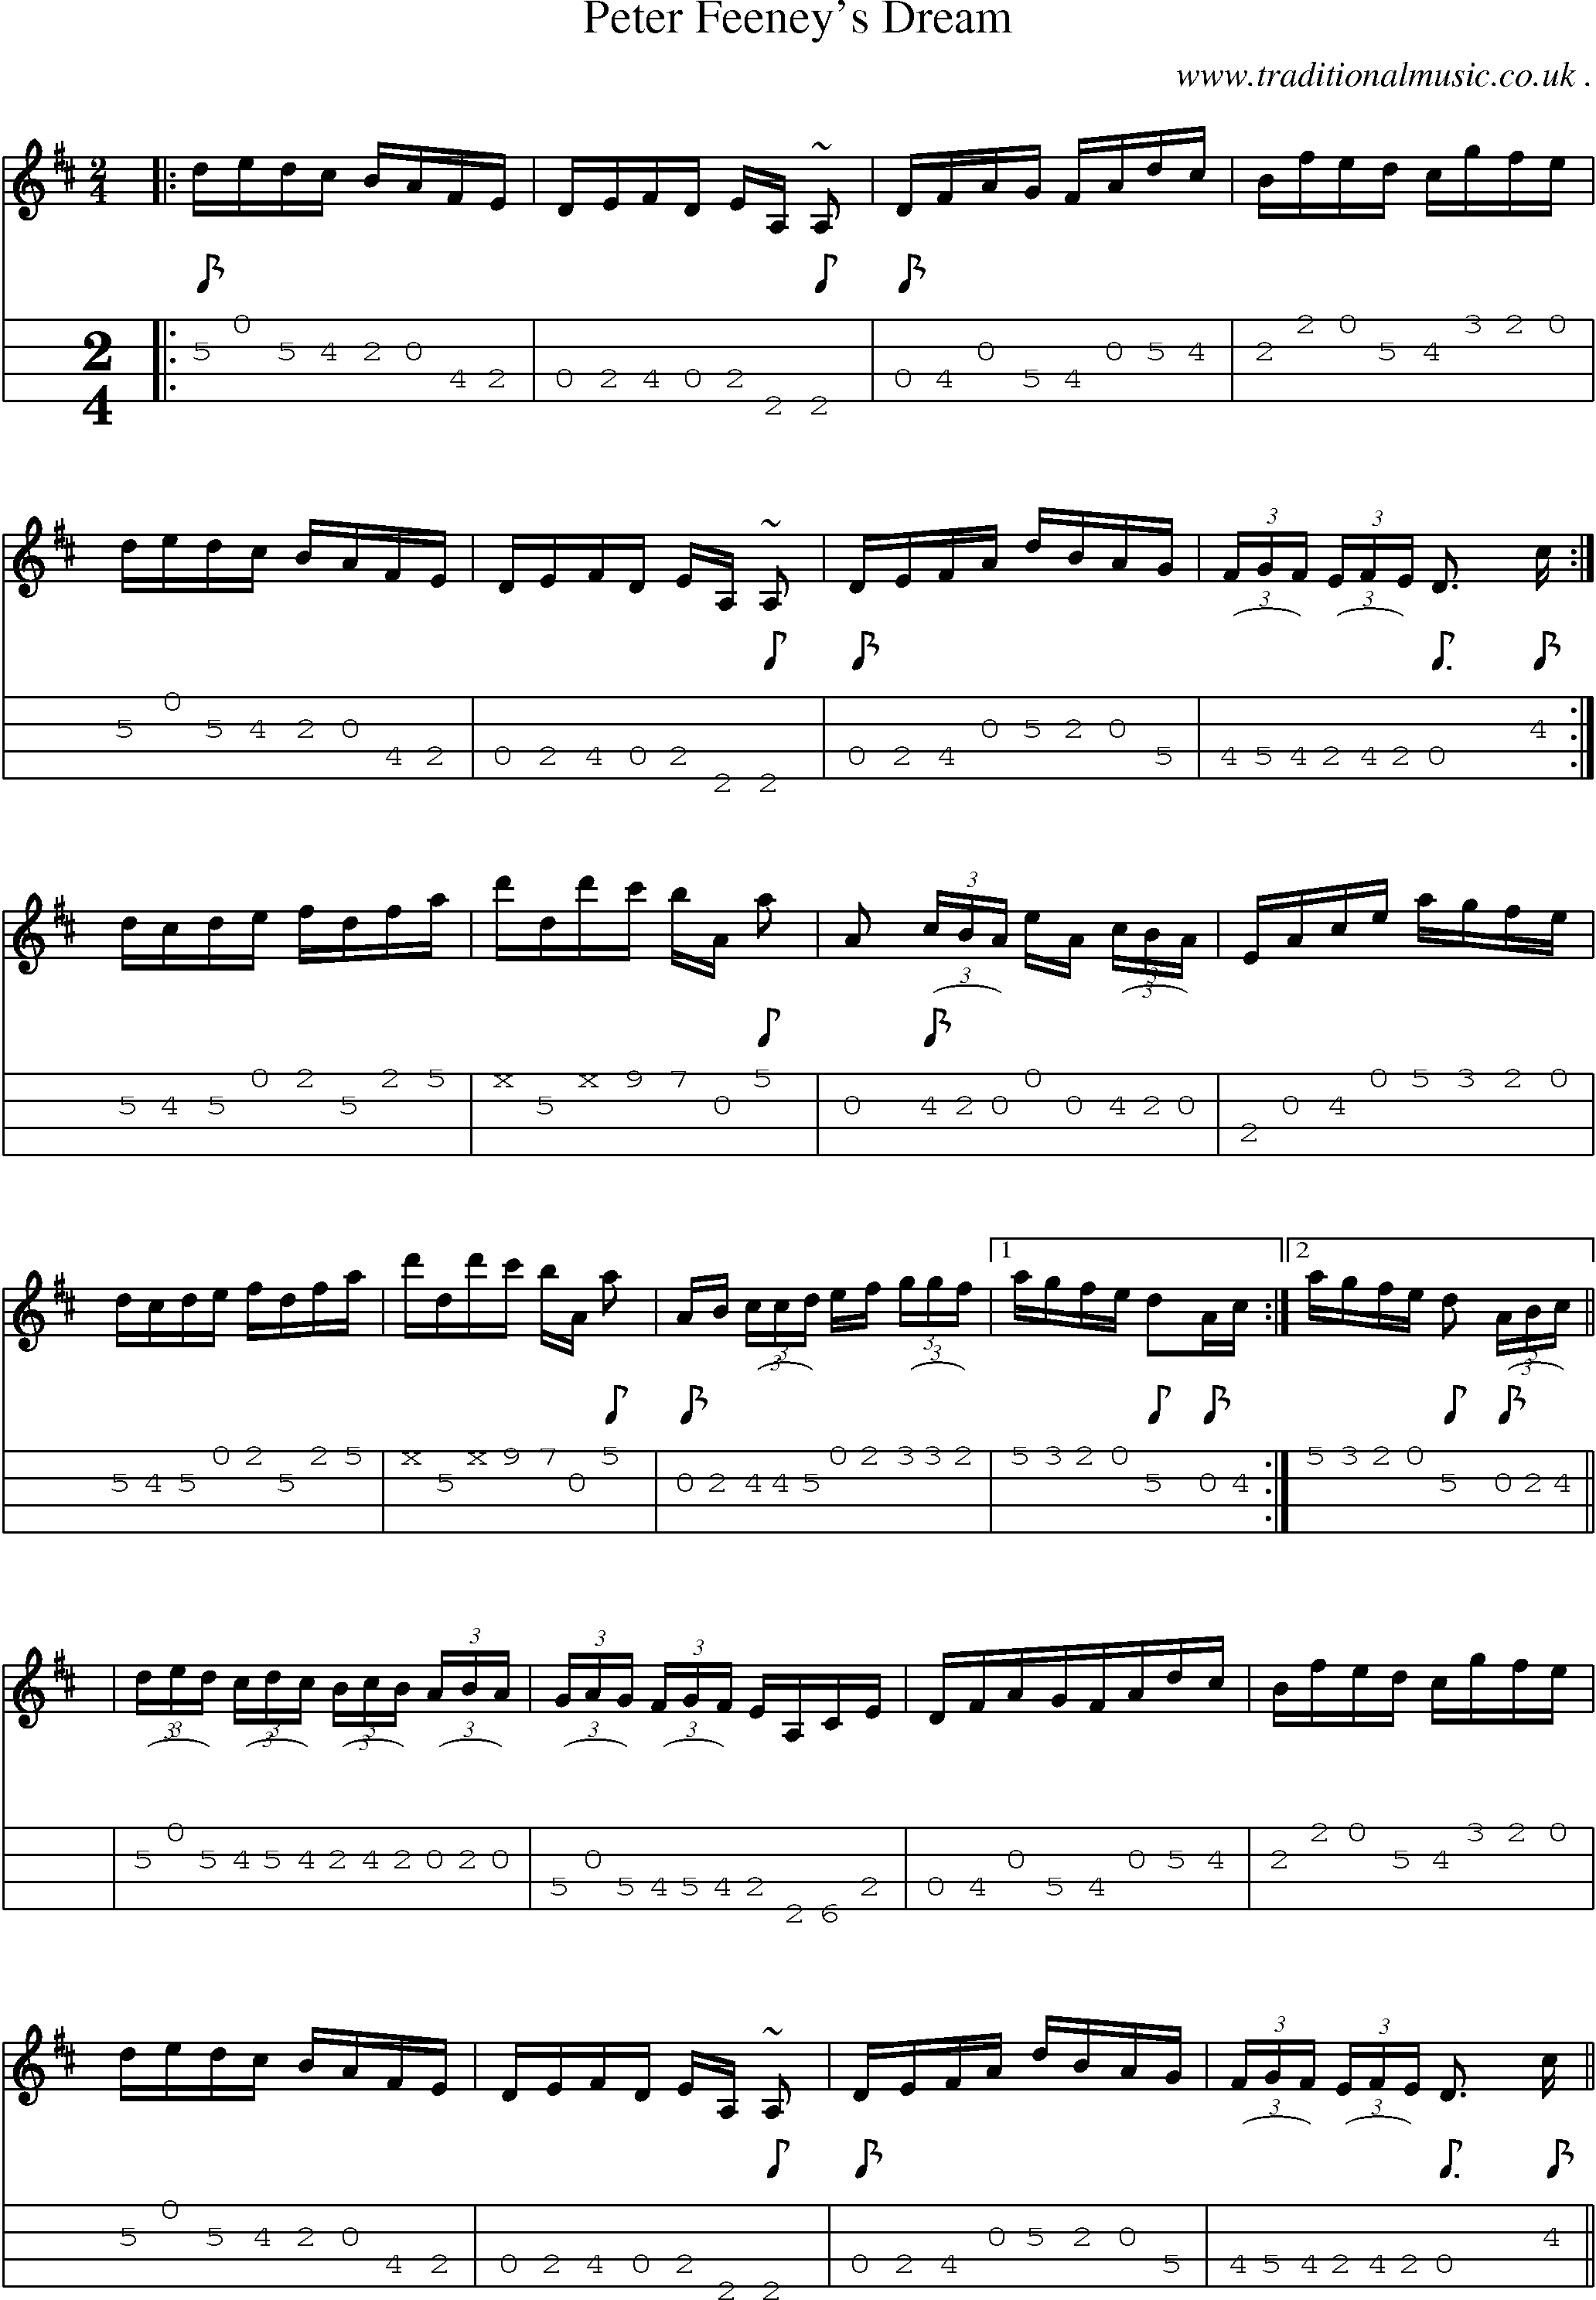 Music Score and Guitar Tabs for Peter Feeneys Dream